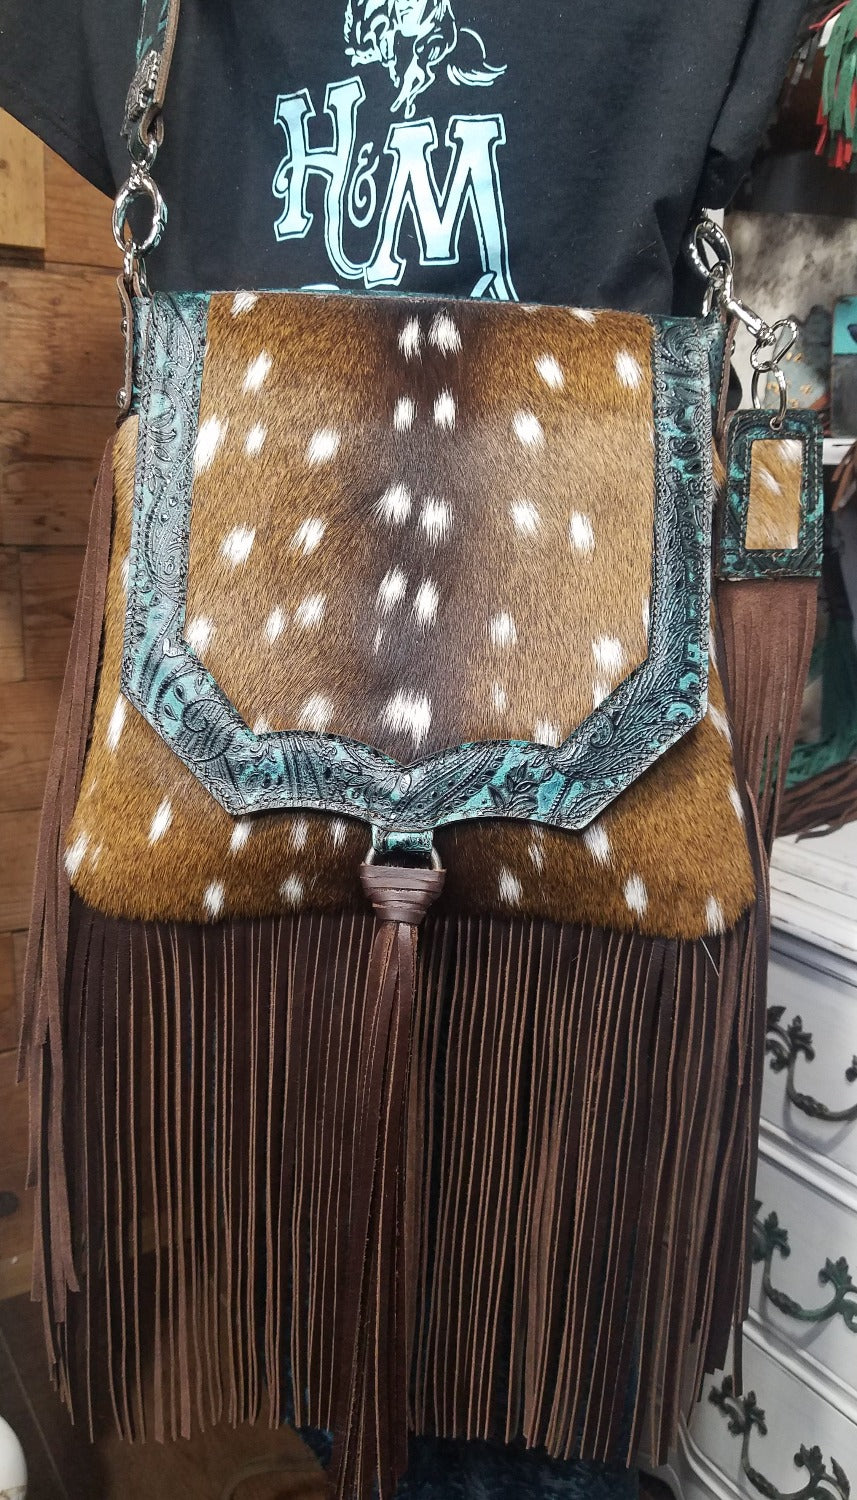 Saddle Bag Mid Rise, Axis Deer with Paisley